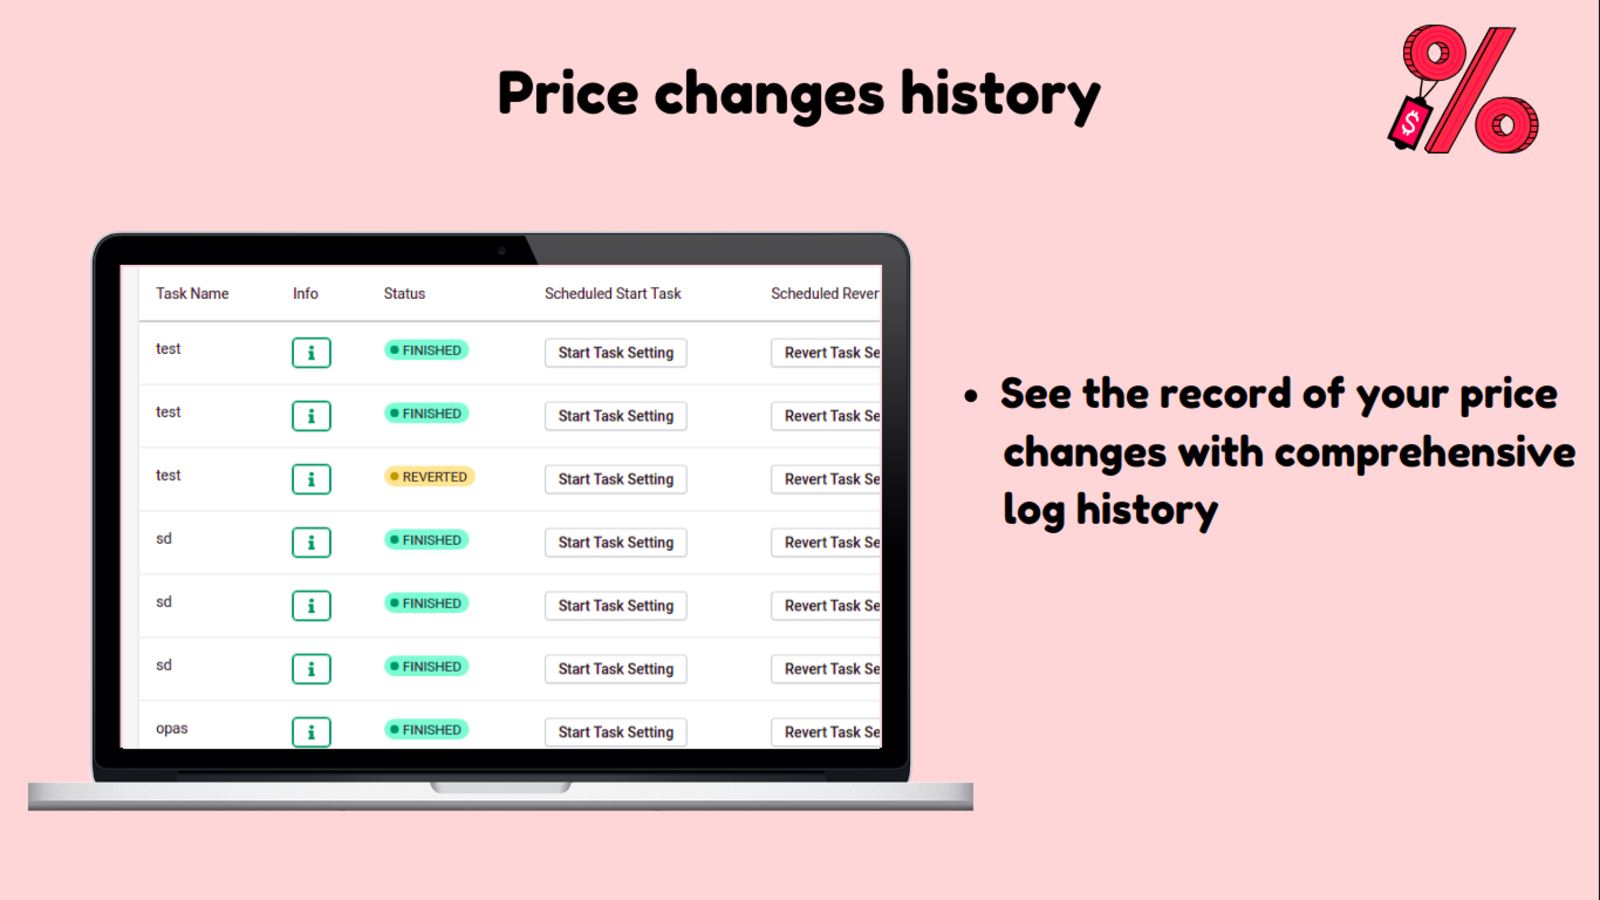 see the record of your price changes with comprehensive log